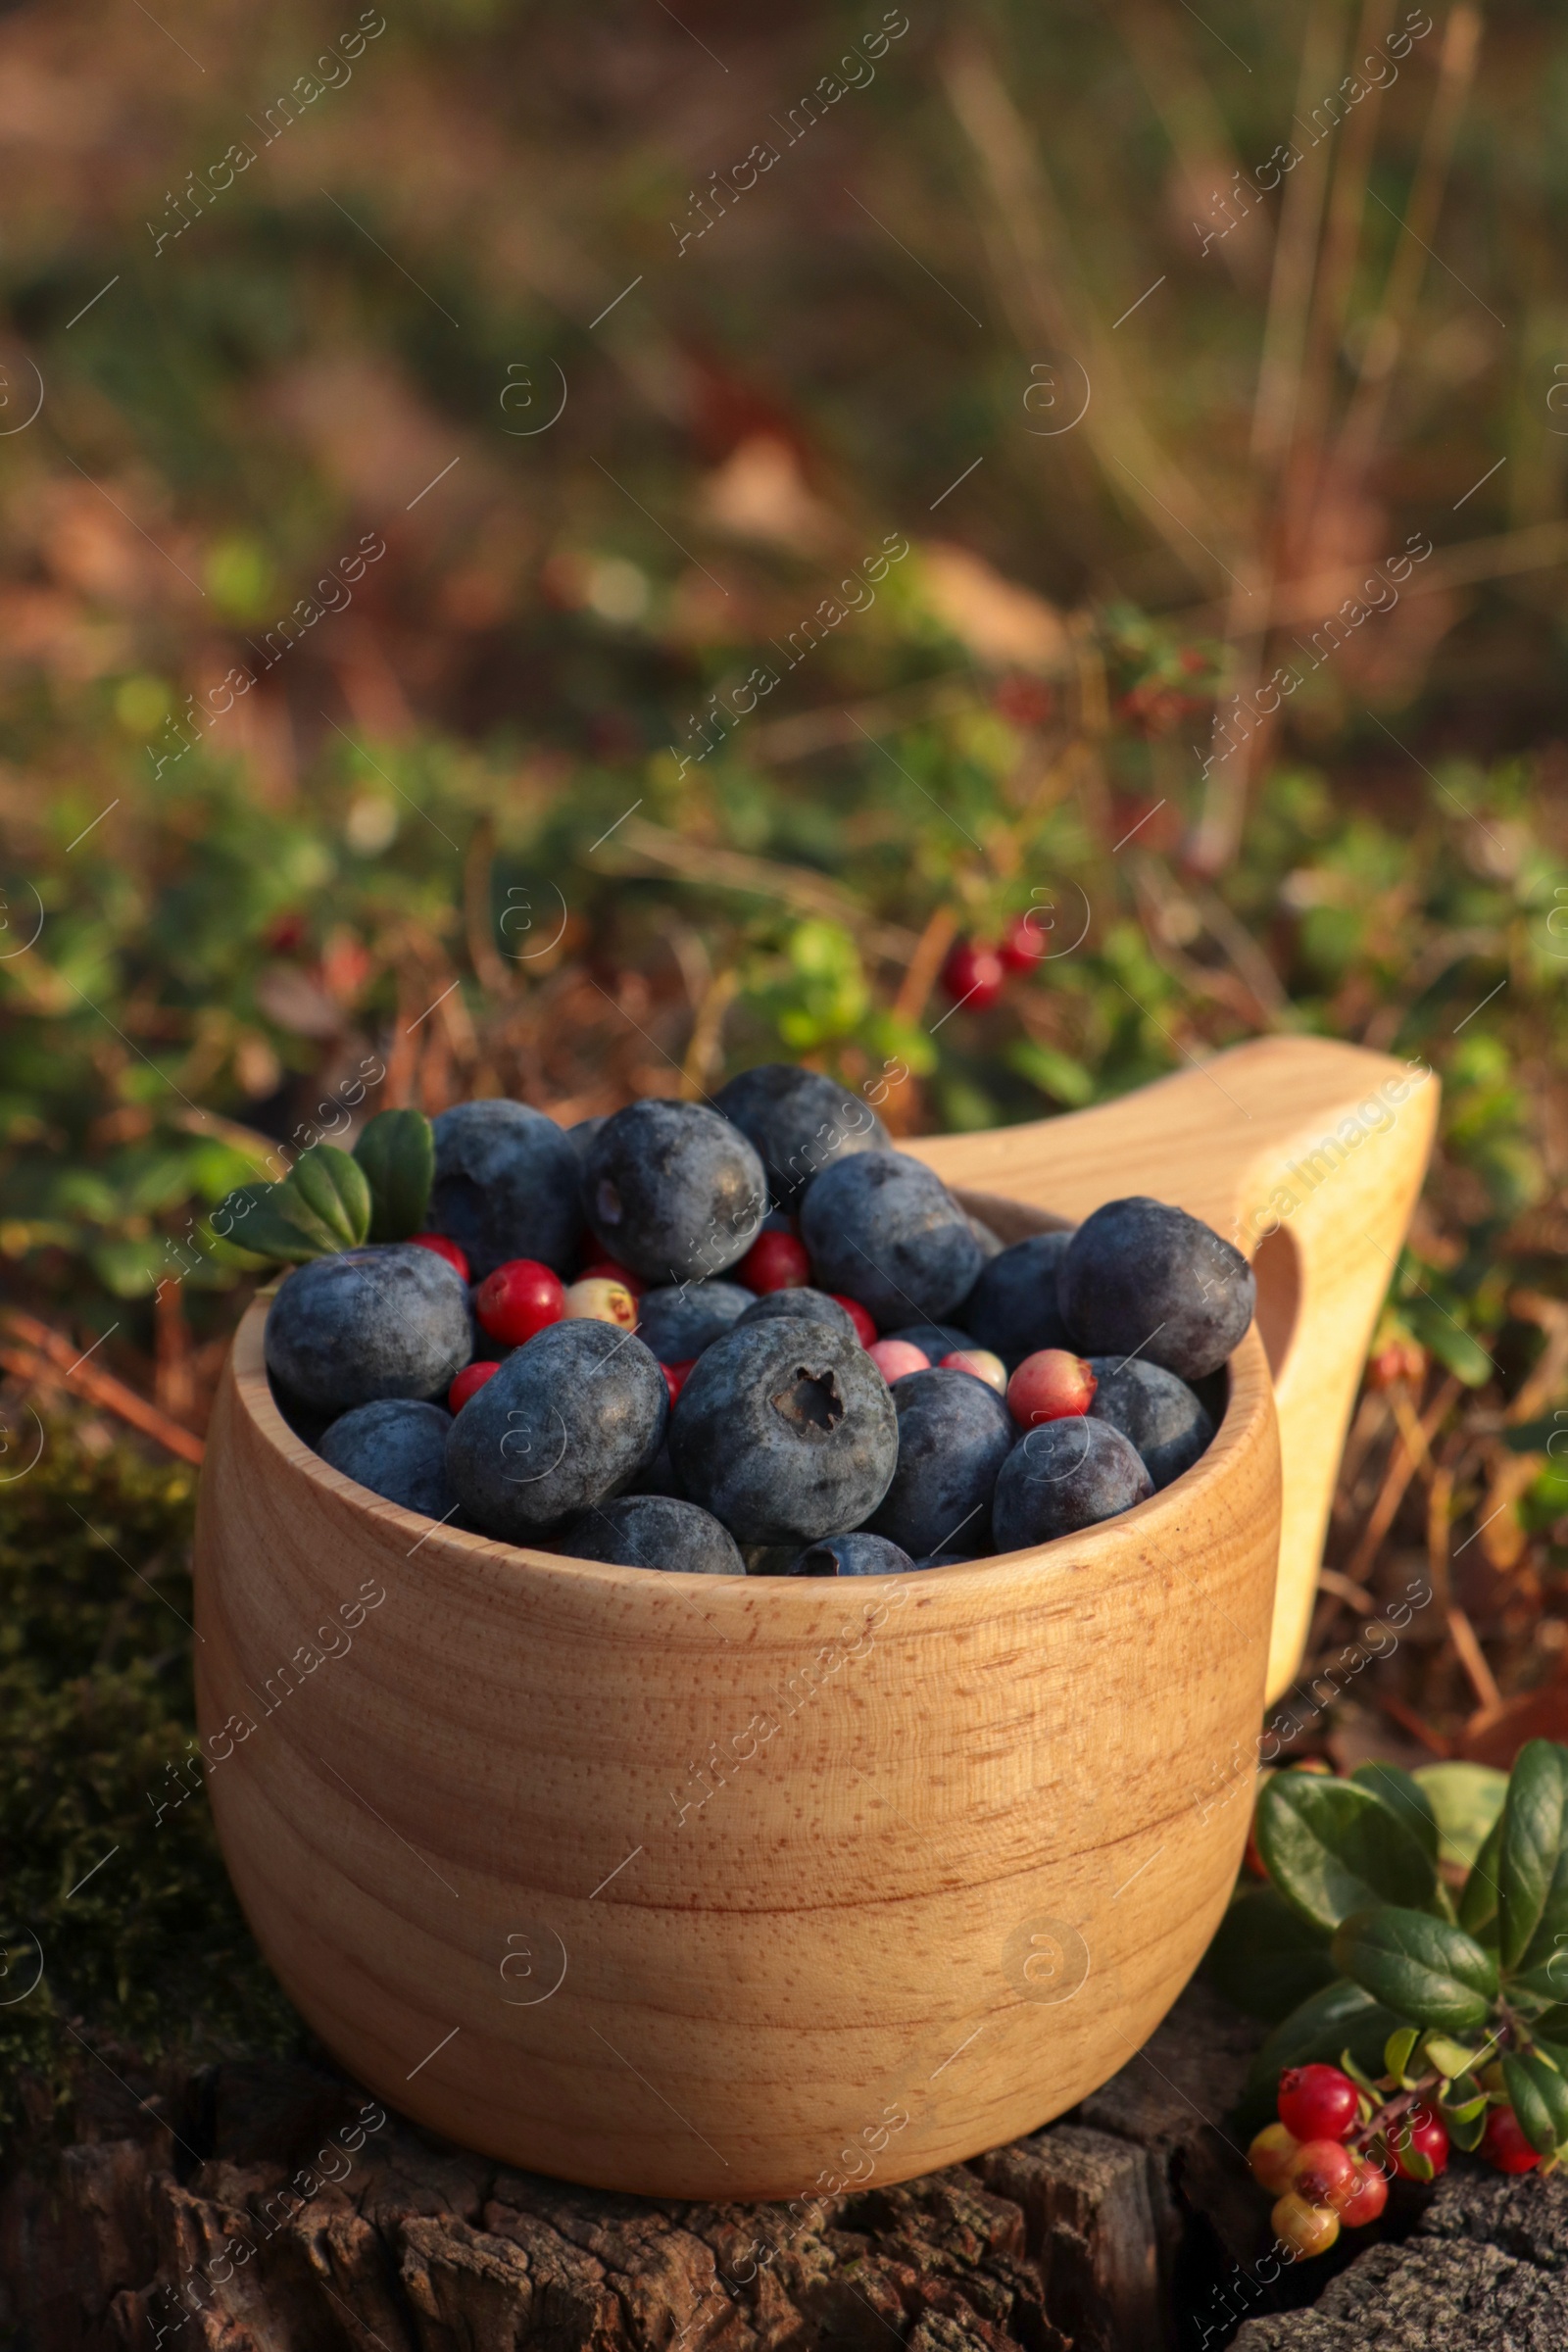 Photo of Wooden mug full of fresh ripe blueberries and lingonberries on grass, closeup